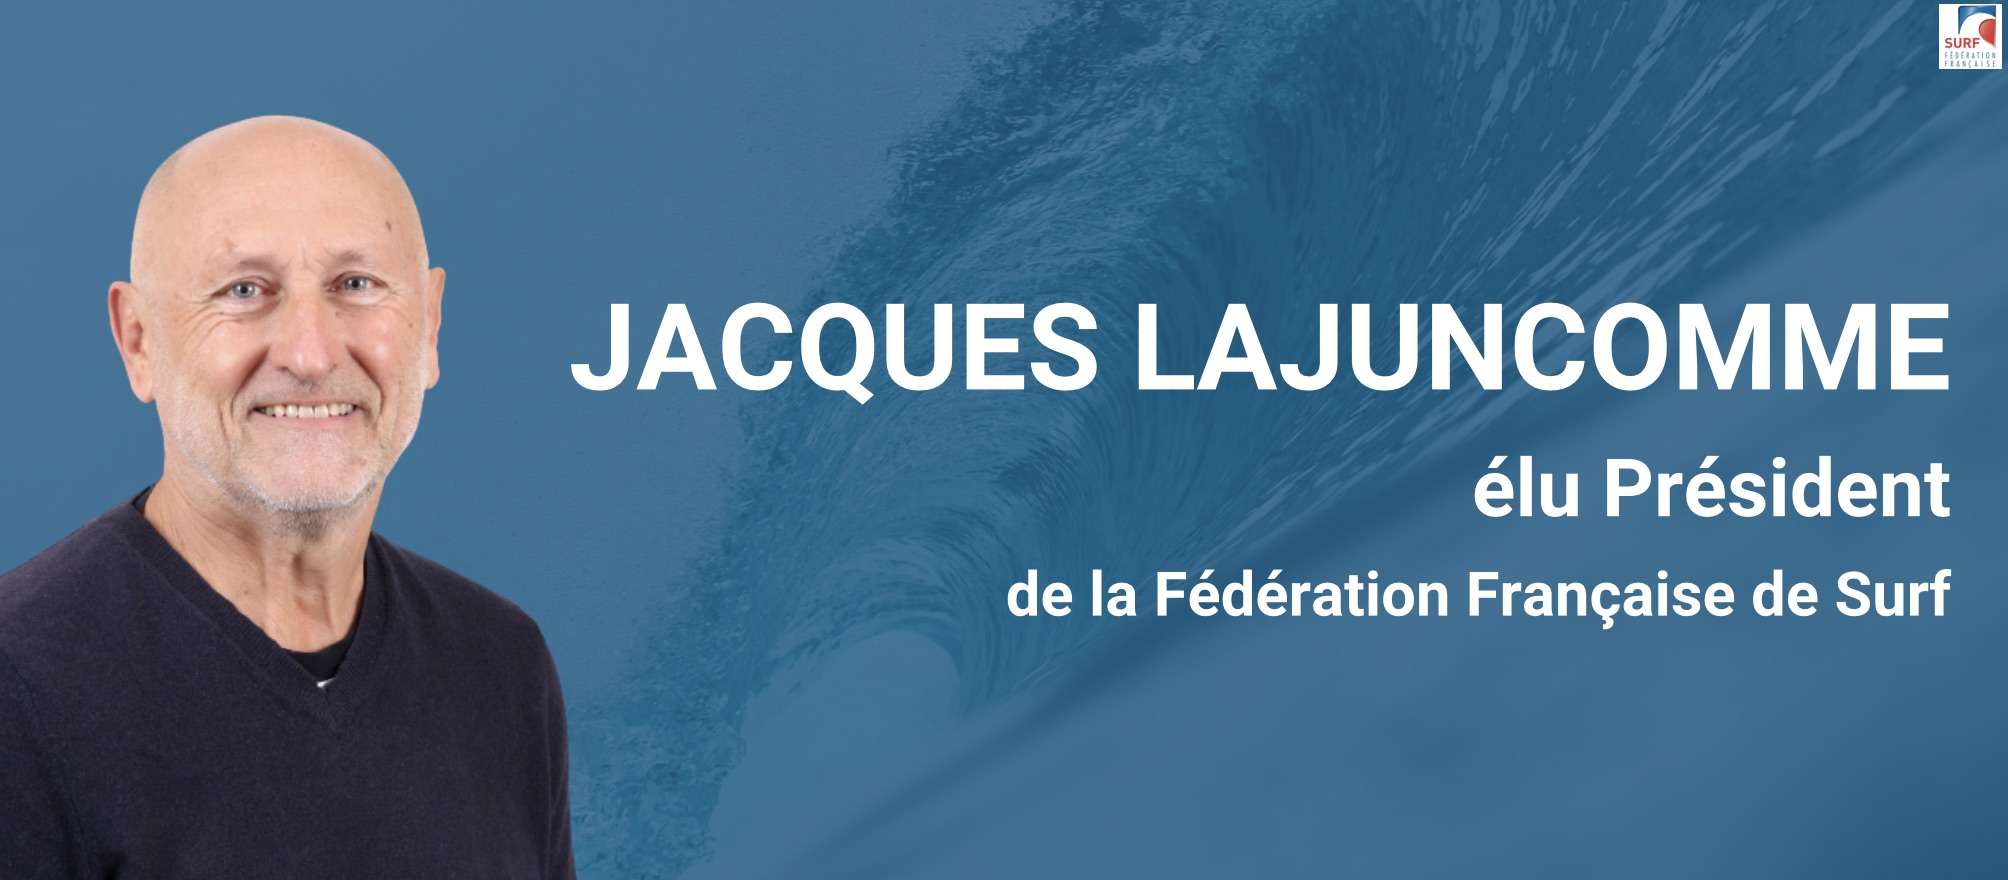 Jacques Lajuncomme has been elected President of the French Surfing Federation ©French Surfing Federation